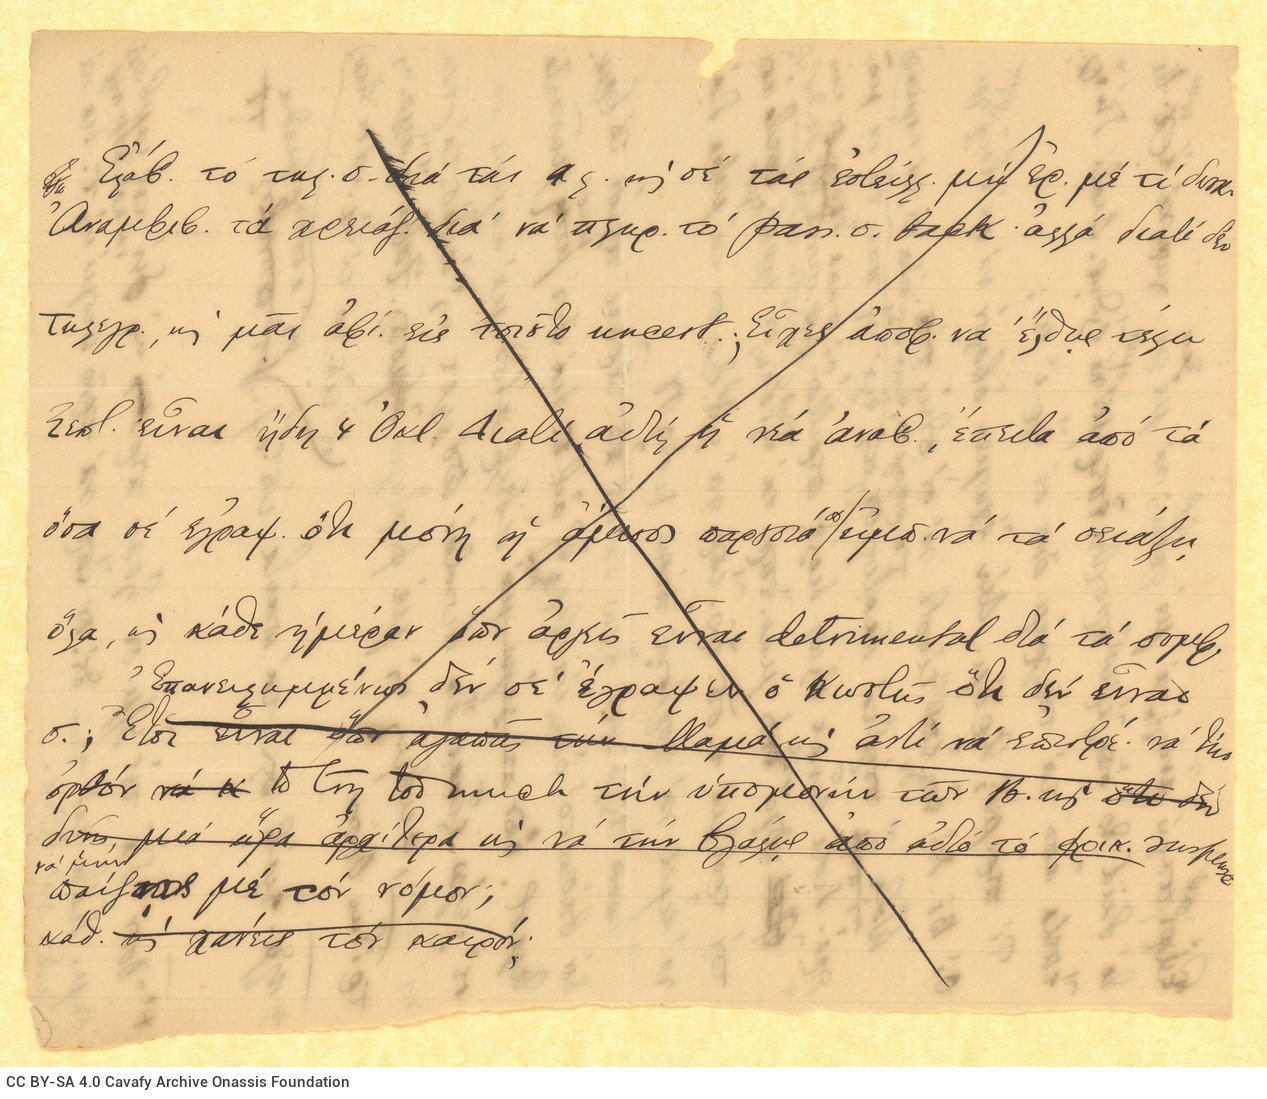 Fragment of a handwritten draft letter by C. P. Cavafy to his brother, Aristeidis, from the 1889 correspondence series, on bo